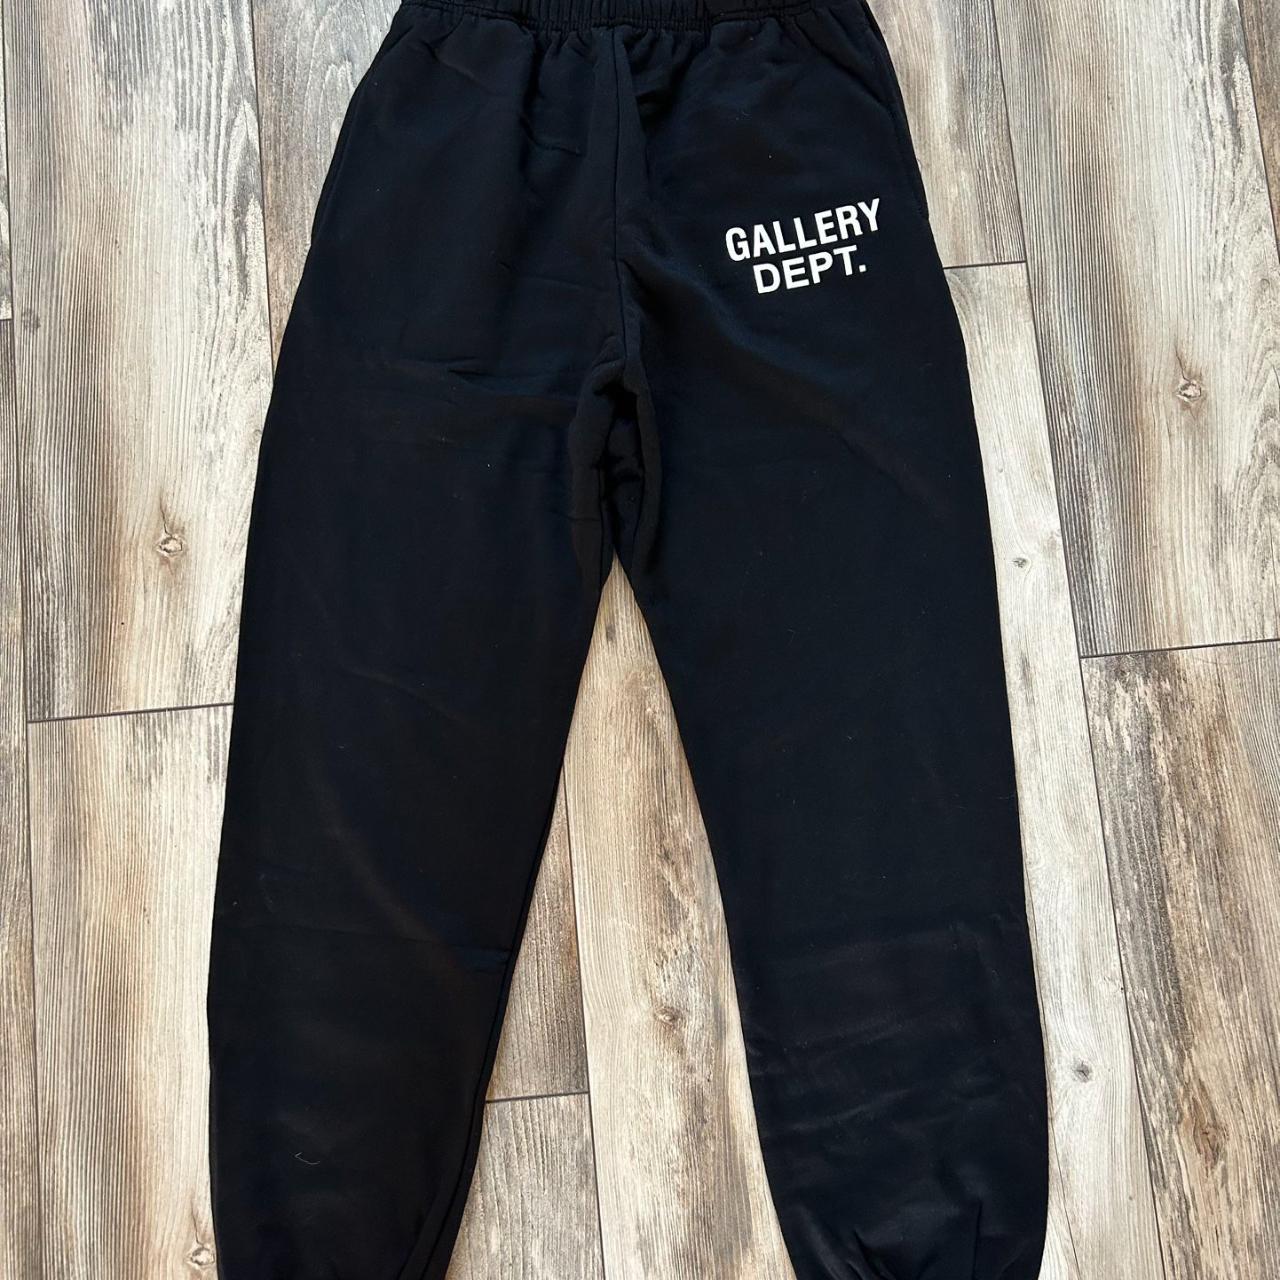 Gallery Dept. Men's Black and White Joggers-tracksuits | Depop